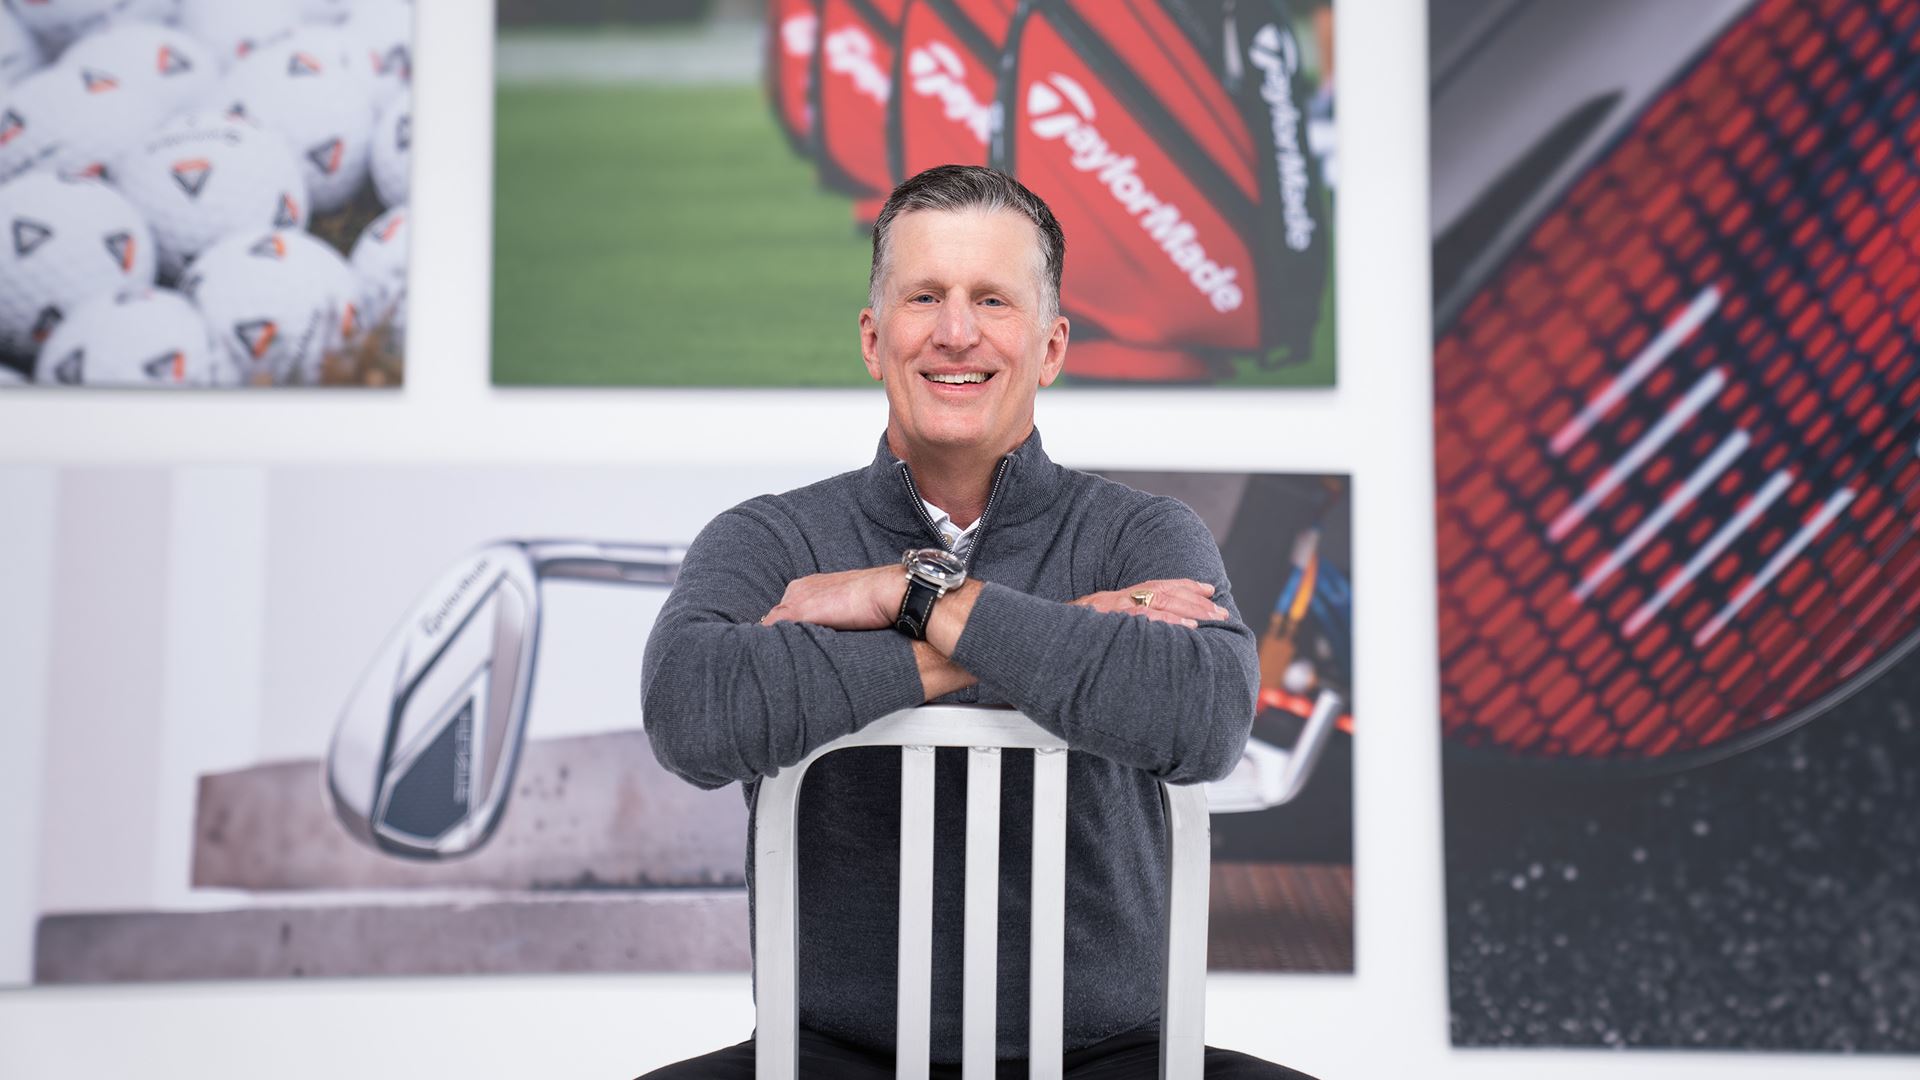 Youth on Course Welcomes TaylorMade Chief Financial Officer Rick Paschal to Board of Directors